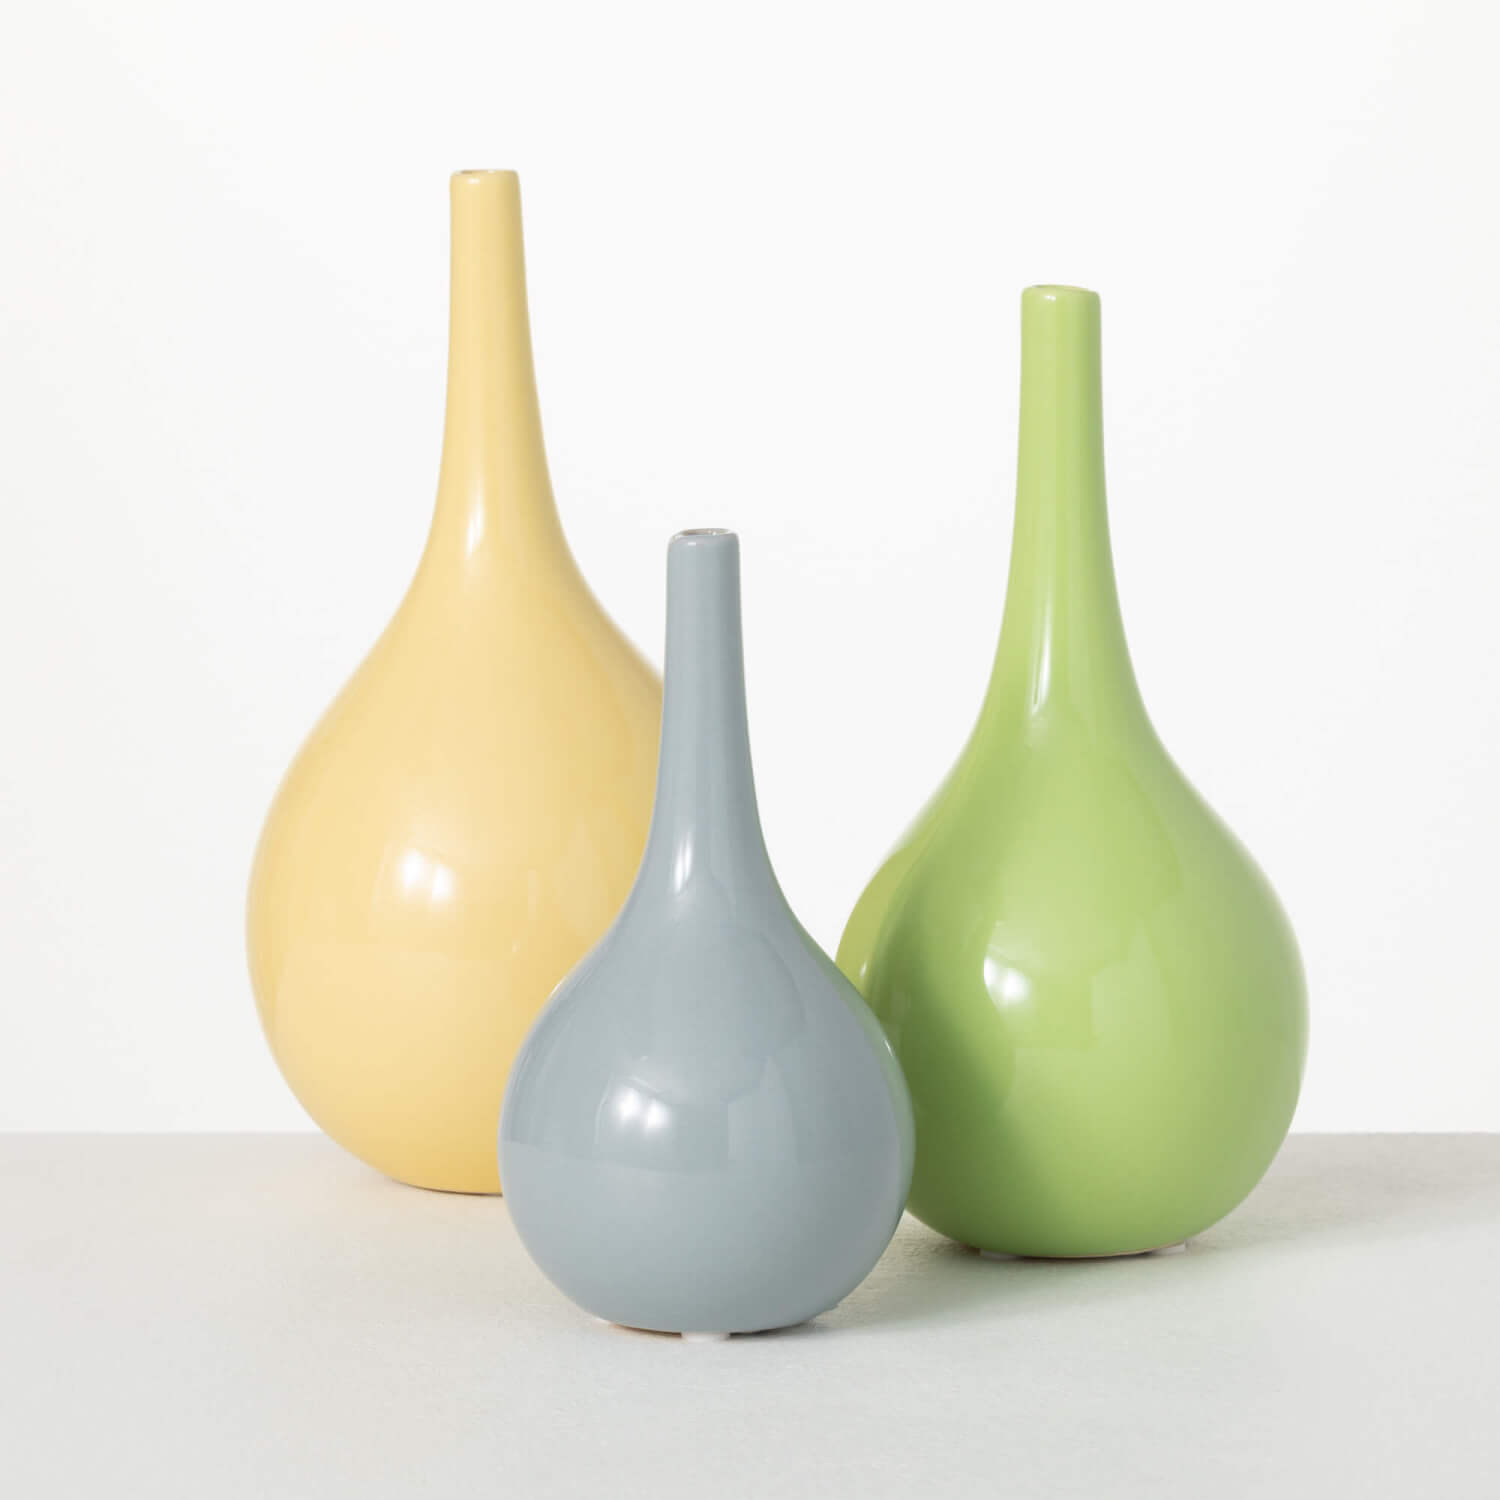 all three colors of bright glossy vases displayed against a white background